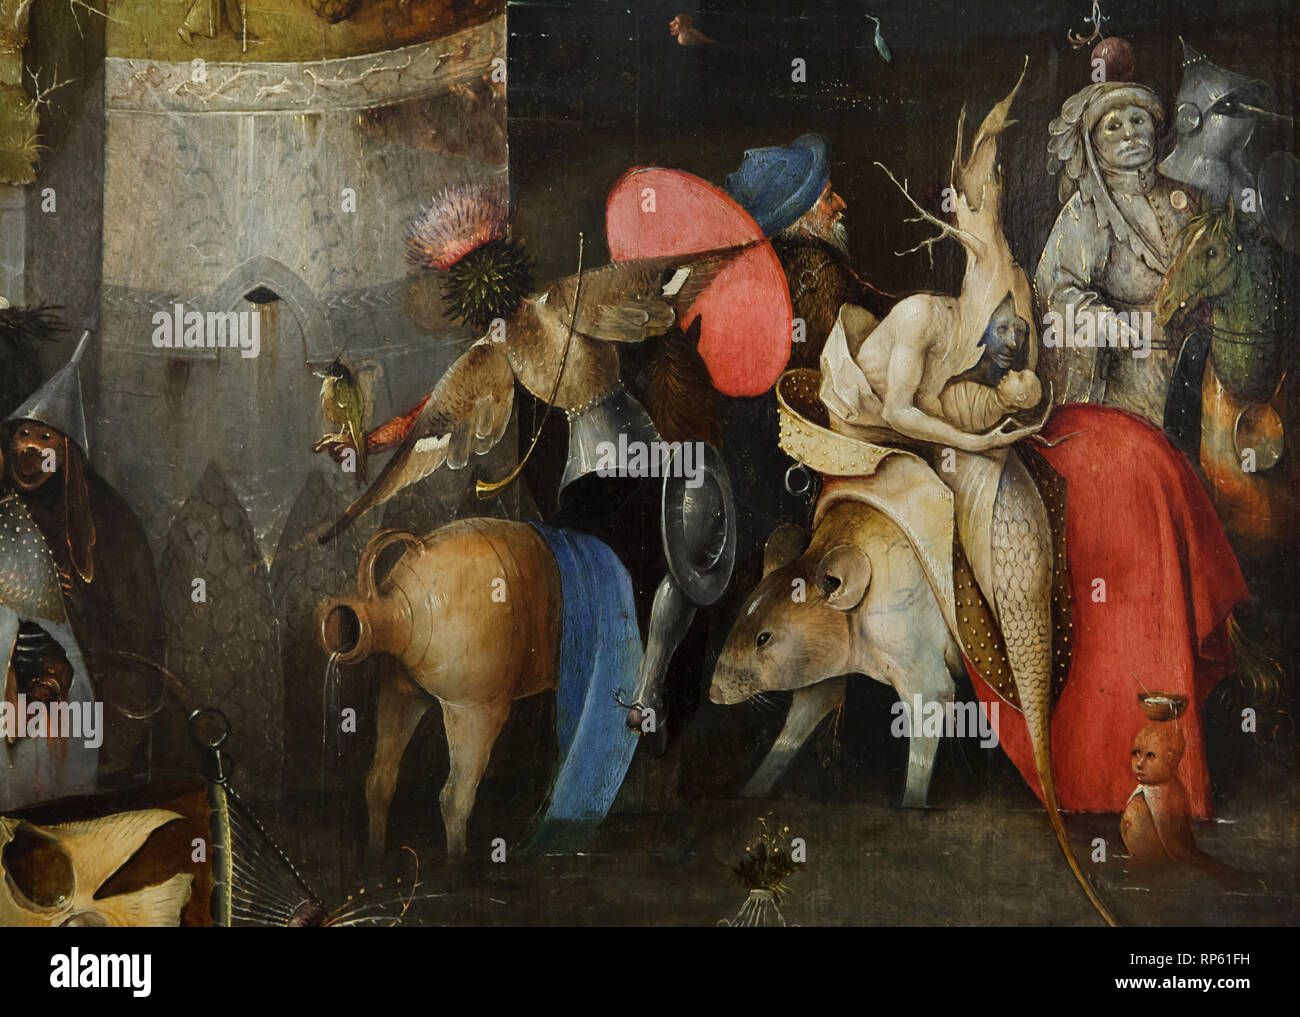 Detail of the altar triptych 'Temptation of Saint Anthony' by Dutch Renaissance painter Hieronymus Bosch (1490-1500) on display in the National Museum of Ancient Art (Museu Nacional de Arte Antiga) in Lisbon, Portugal. Stock Photo